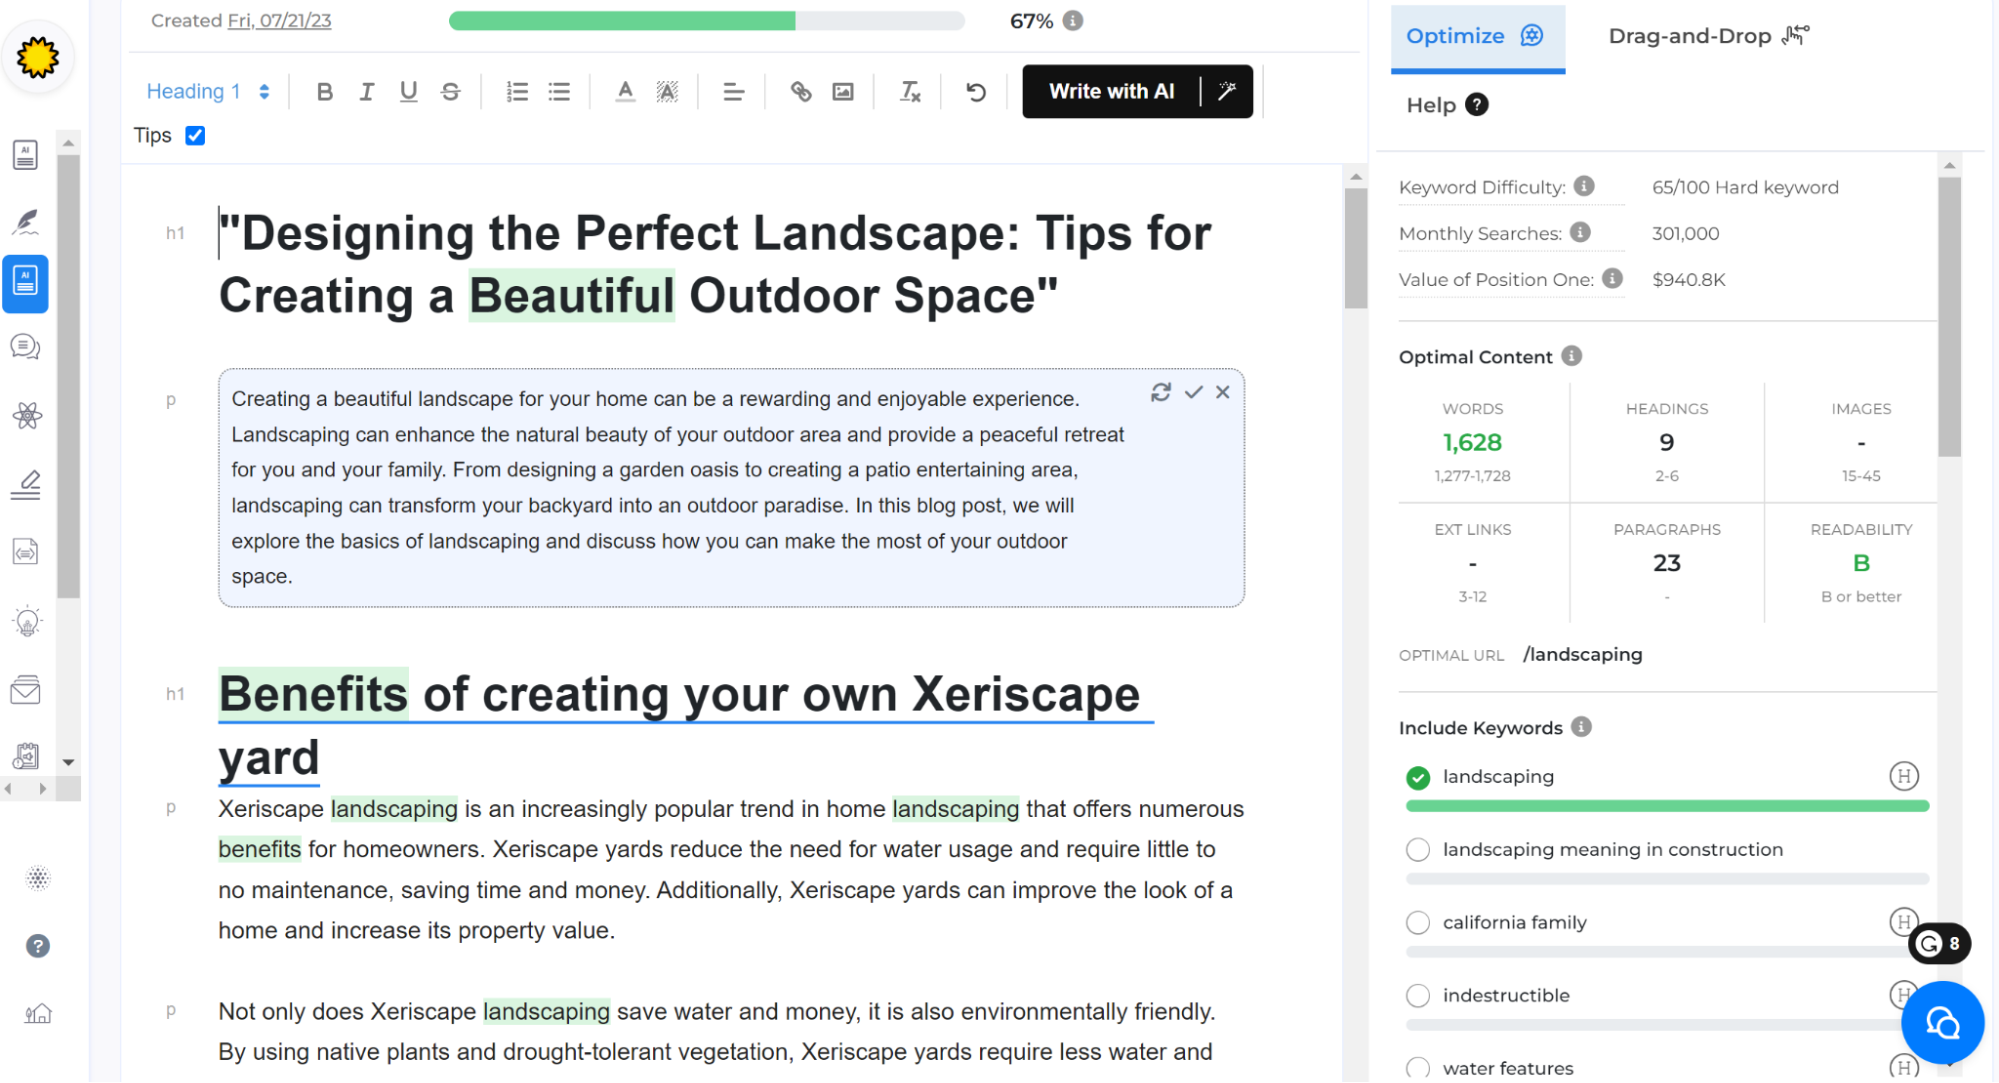 GrowthBar’s article creator interface shows the text on the left and an SEO score on the right. 